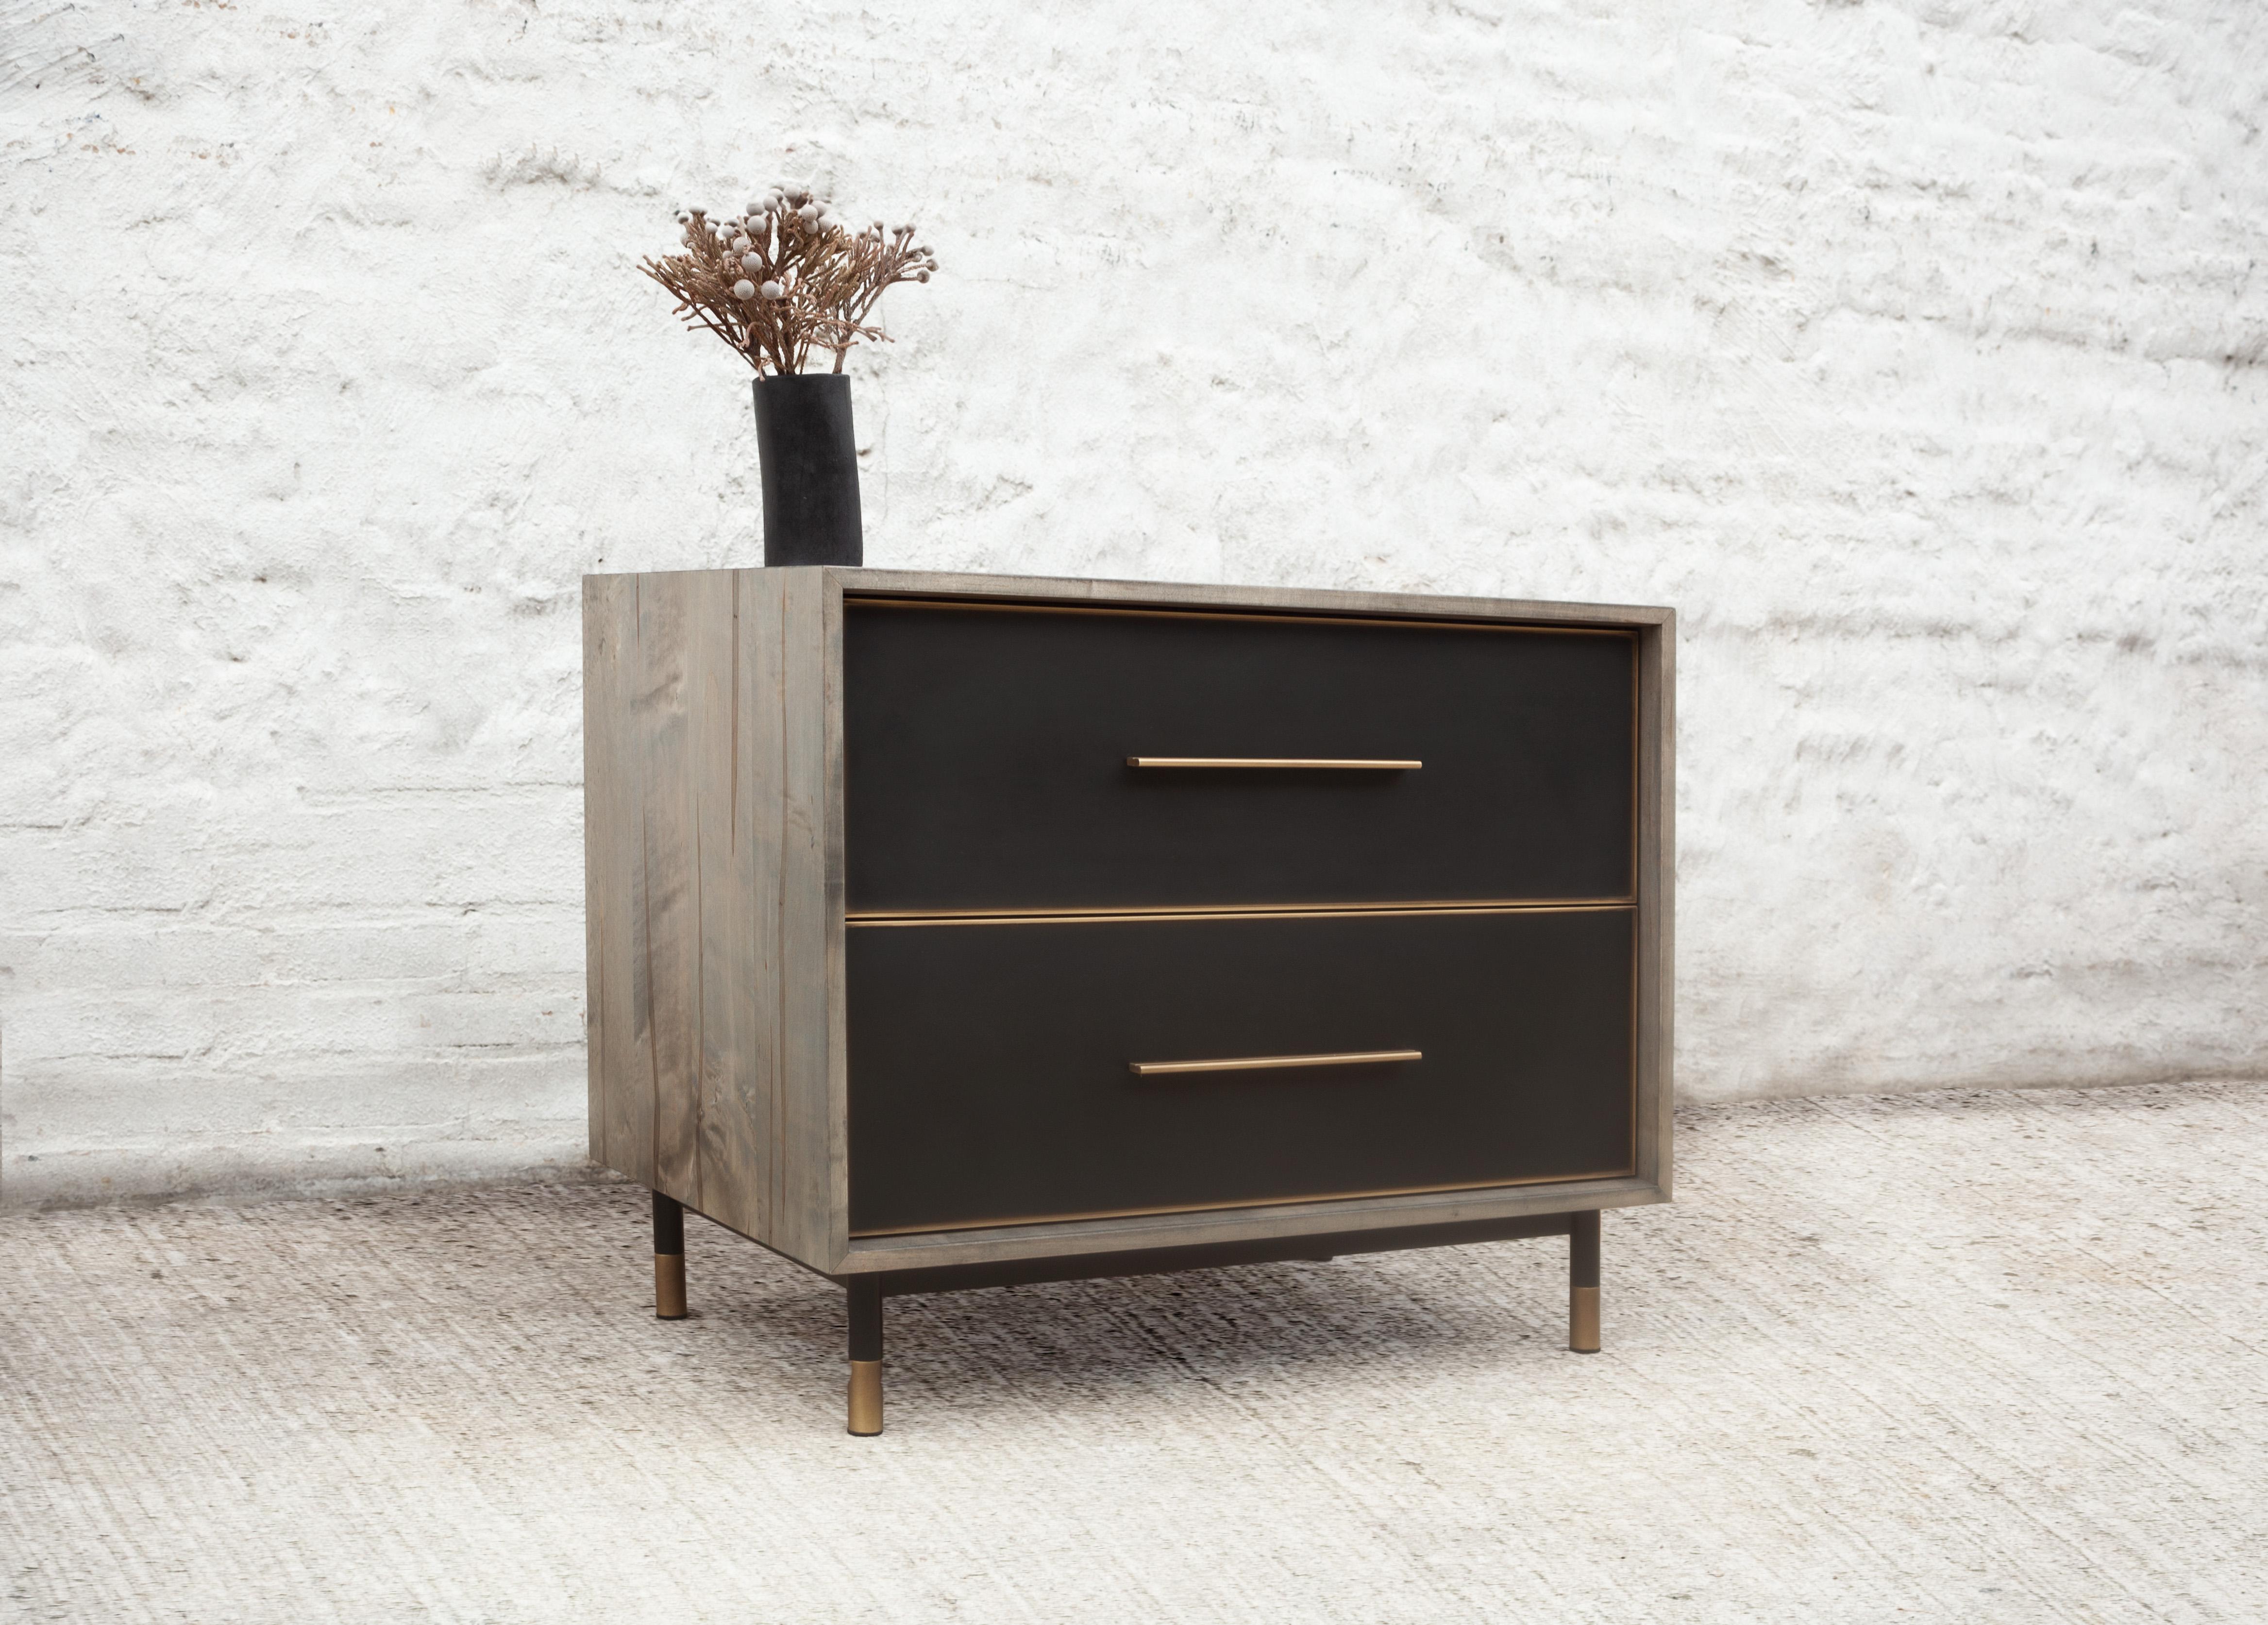 Compact yet compelling, the Jasper end table contrasts smooth and textured surfaces, with resin-cast drawers set in an wood exterior. The simplicity and sleekness of the design belies the wondrous mix of details in each material used delivering a